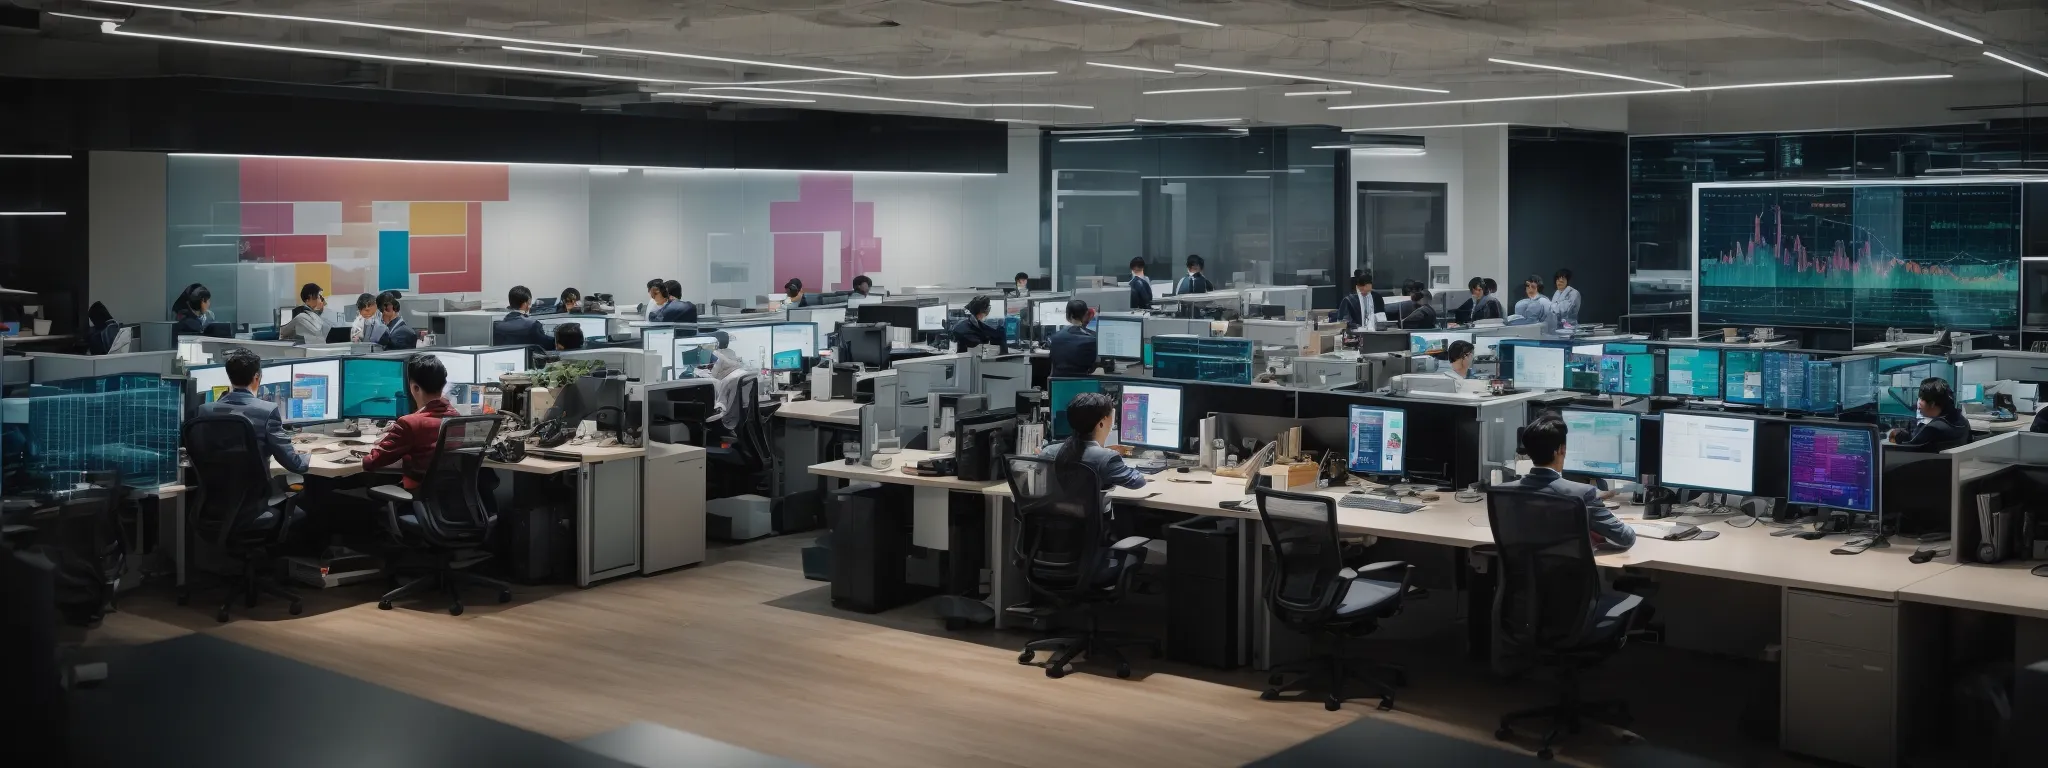 a wide-angle view of a bustling corporate office with teams engaged in collaborative work near computer screens displaying colorful analytics graphs.